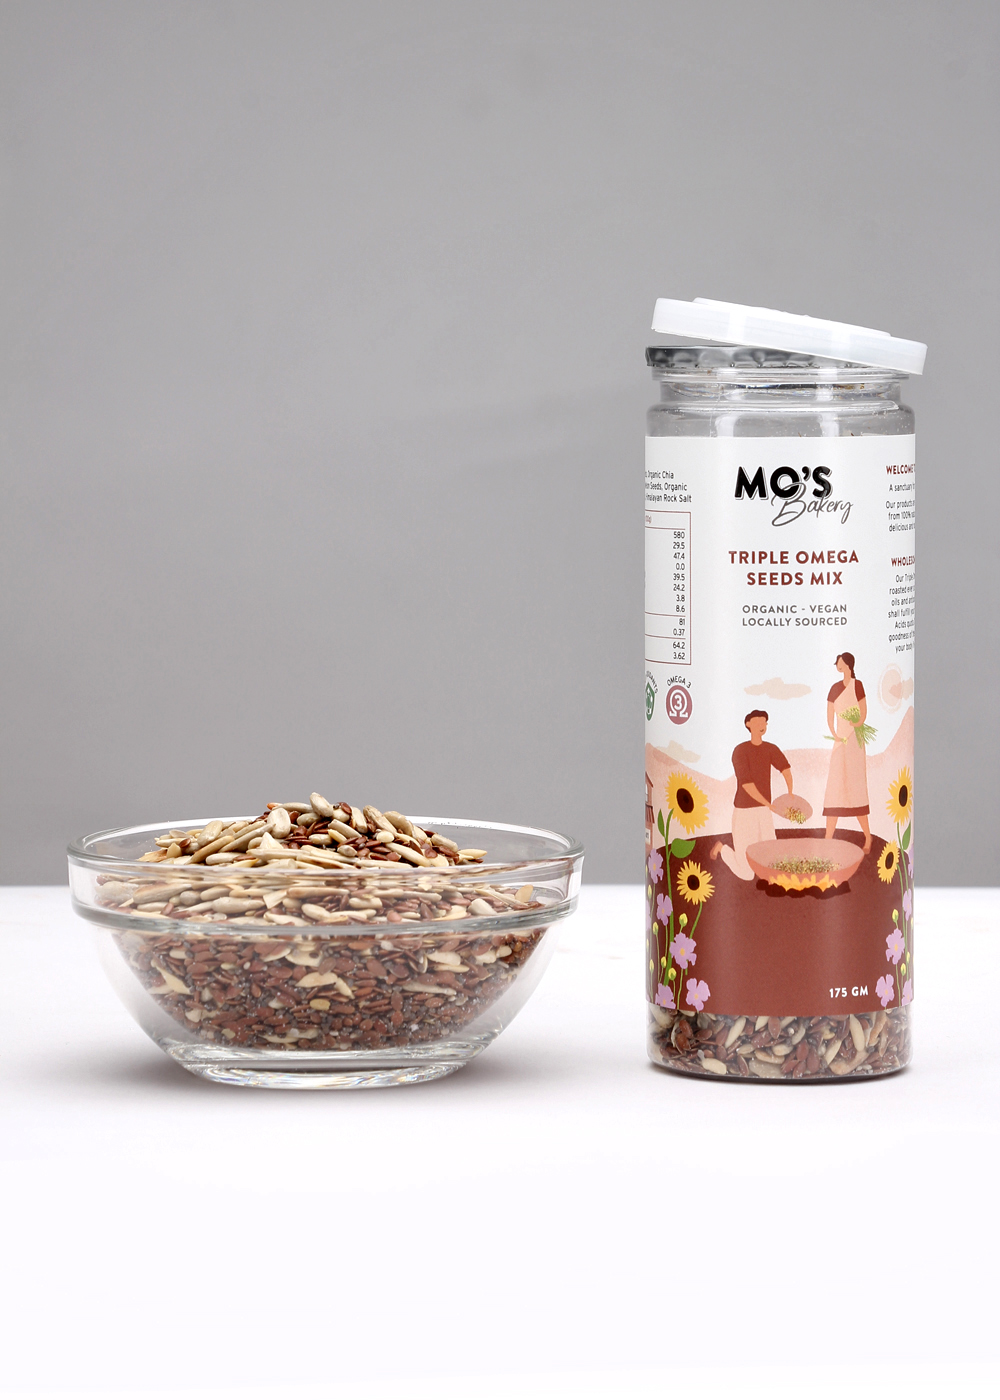 Product: Mo’s Bakery Super Seeds Combo